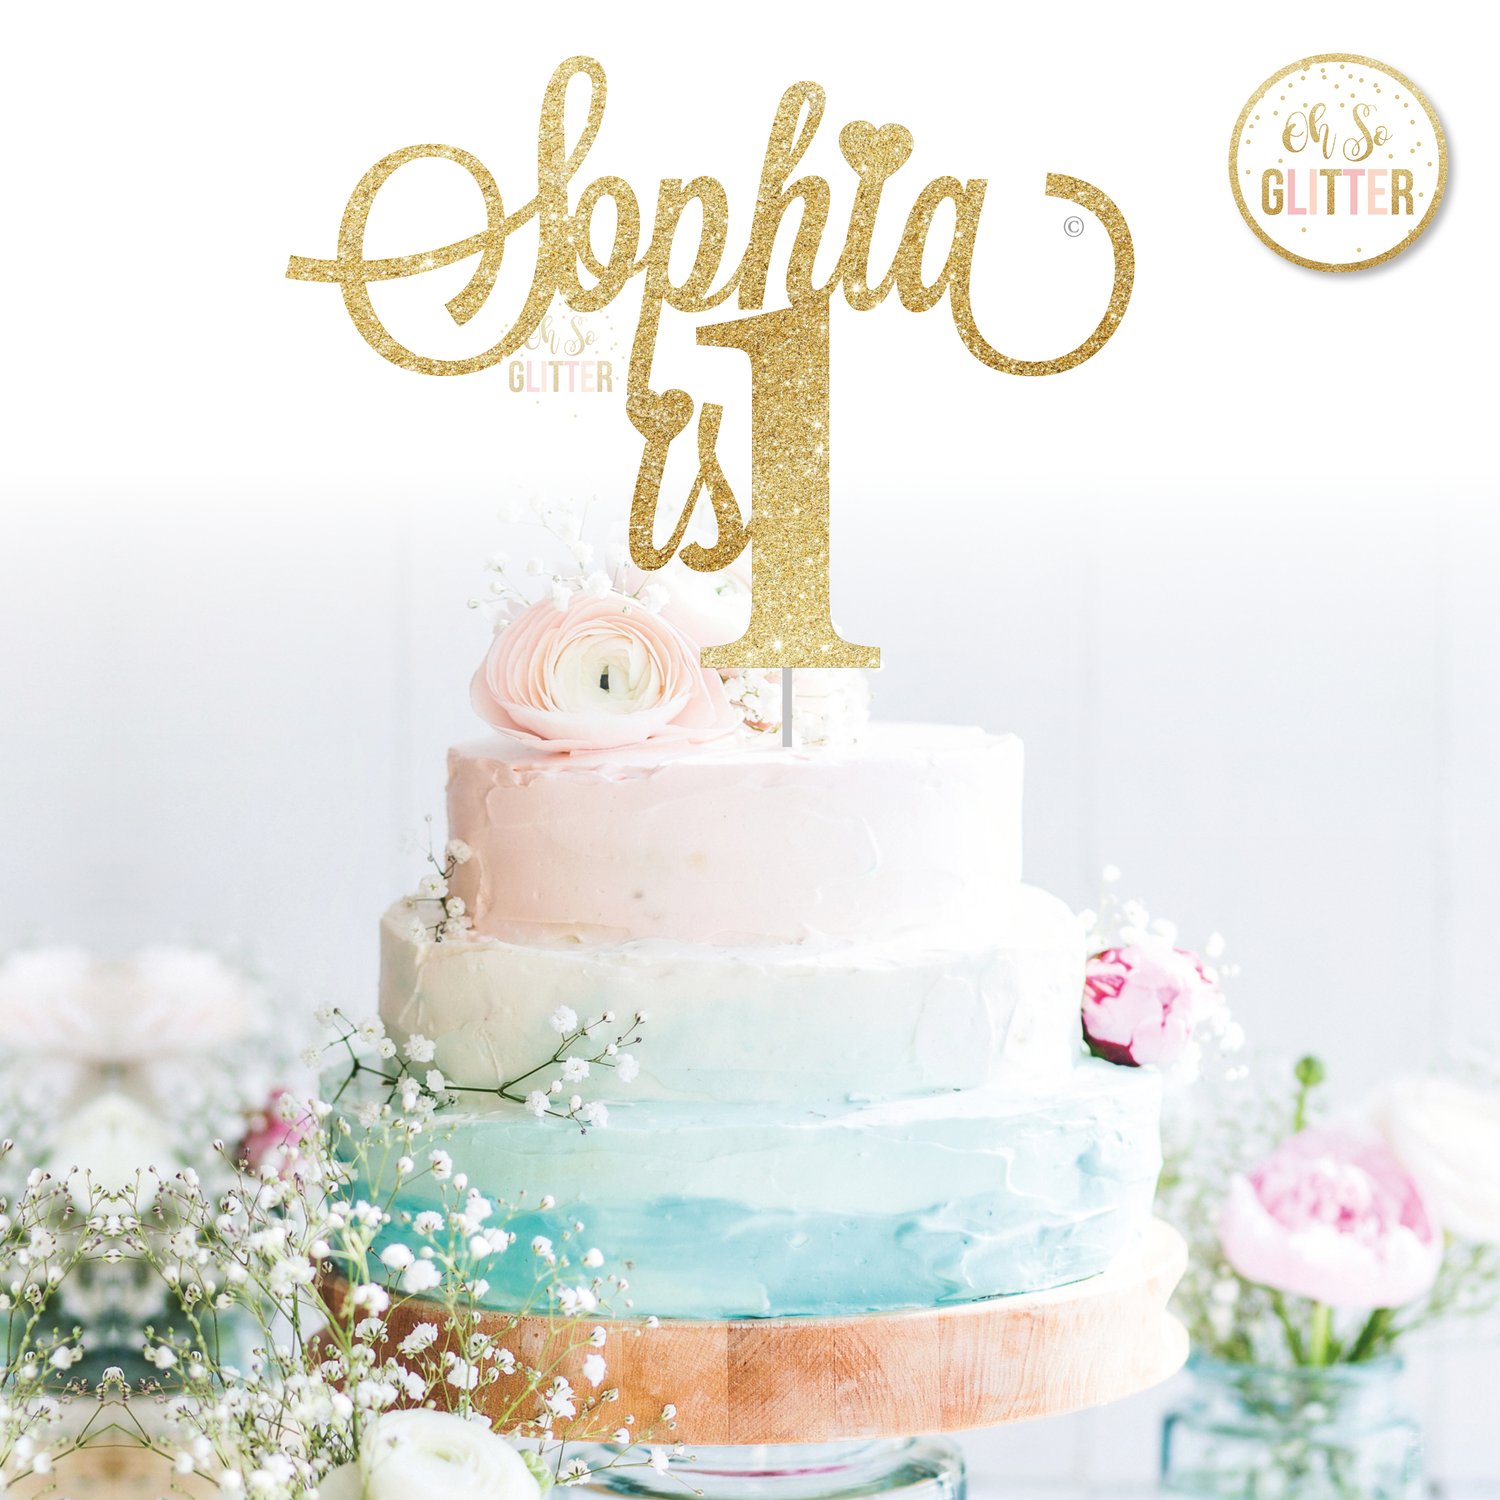 First Birthday cake topper (any age) | Oh So Glitter